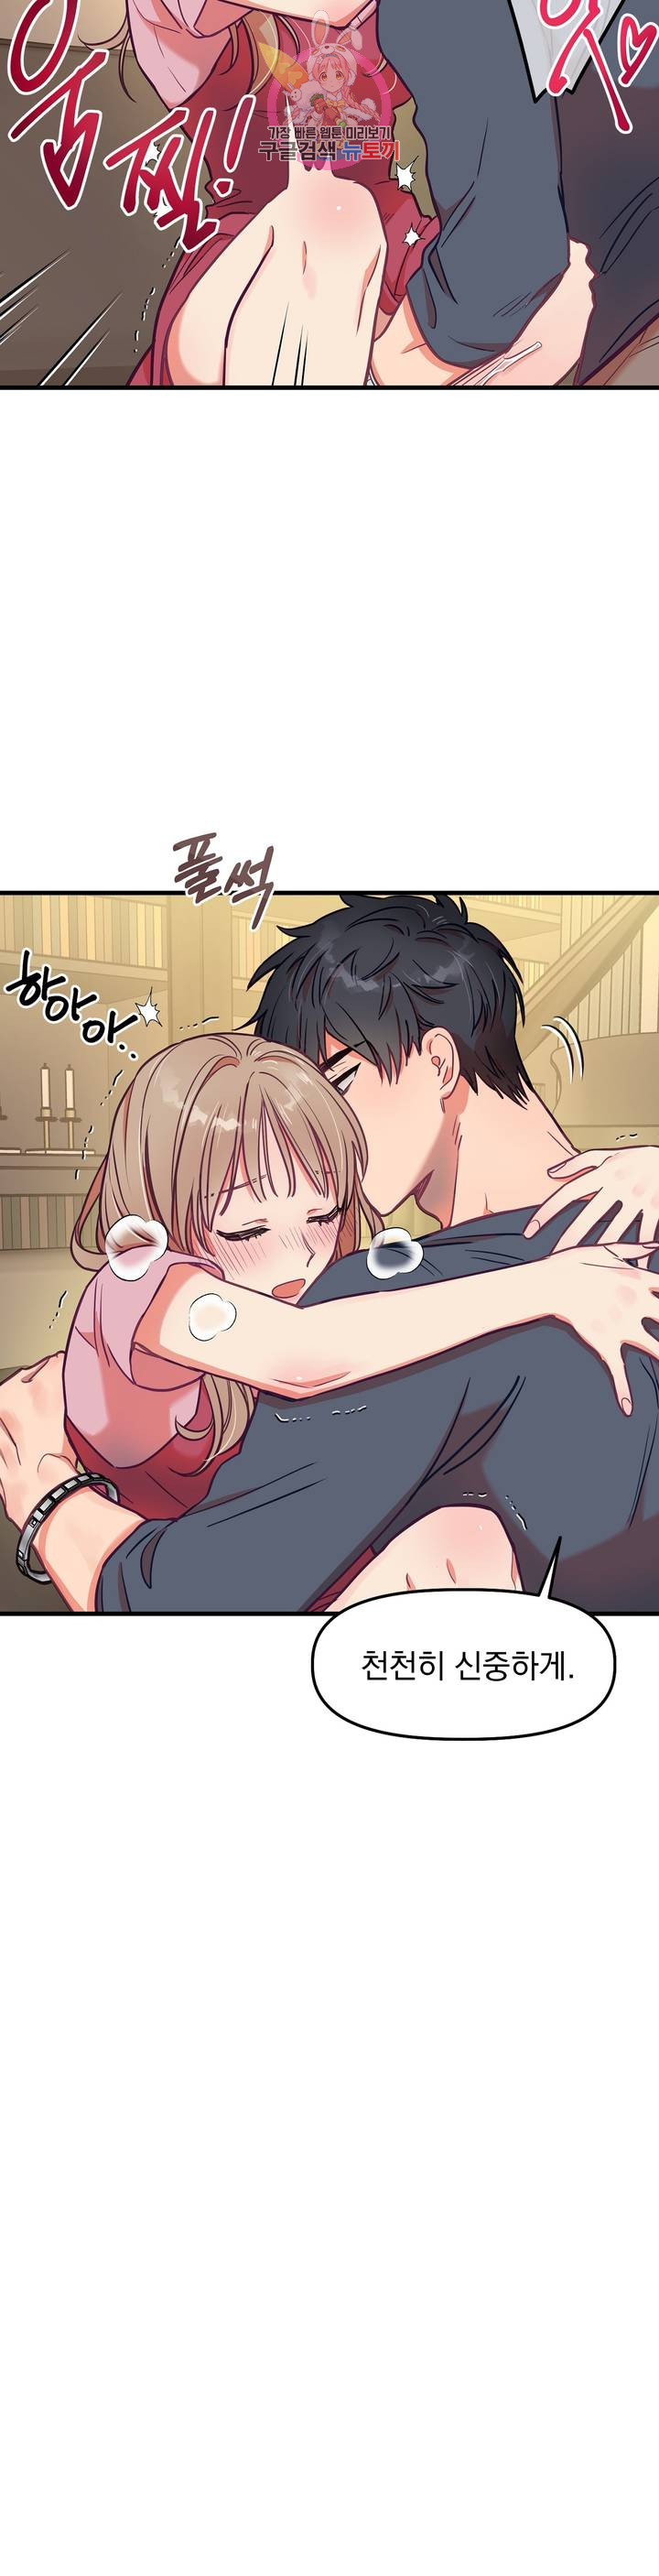 He and He and He - Chapter 16 - Read Manhwa raw, Raw Manga, Manhwa Hentai,  Manhwa 18, Hentai Manga, Hentai Comics, E hentai